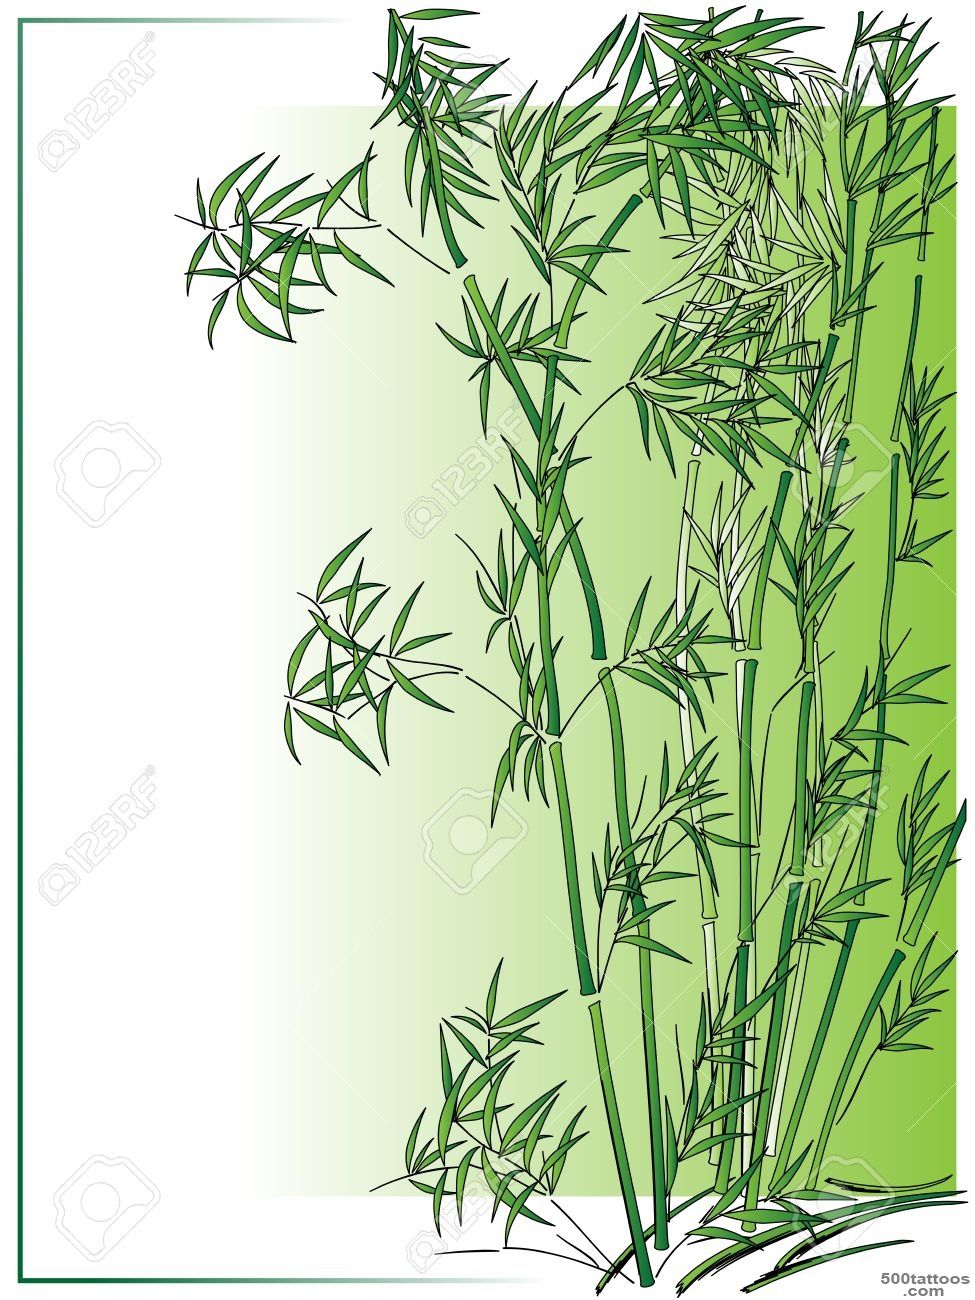 Bamboo In The Asian Style In Green Frame. Royalty Free Cliparts ..._23